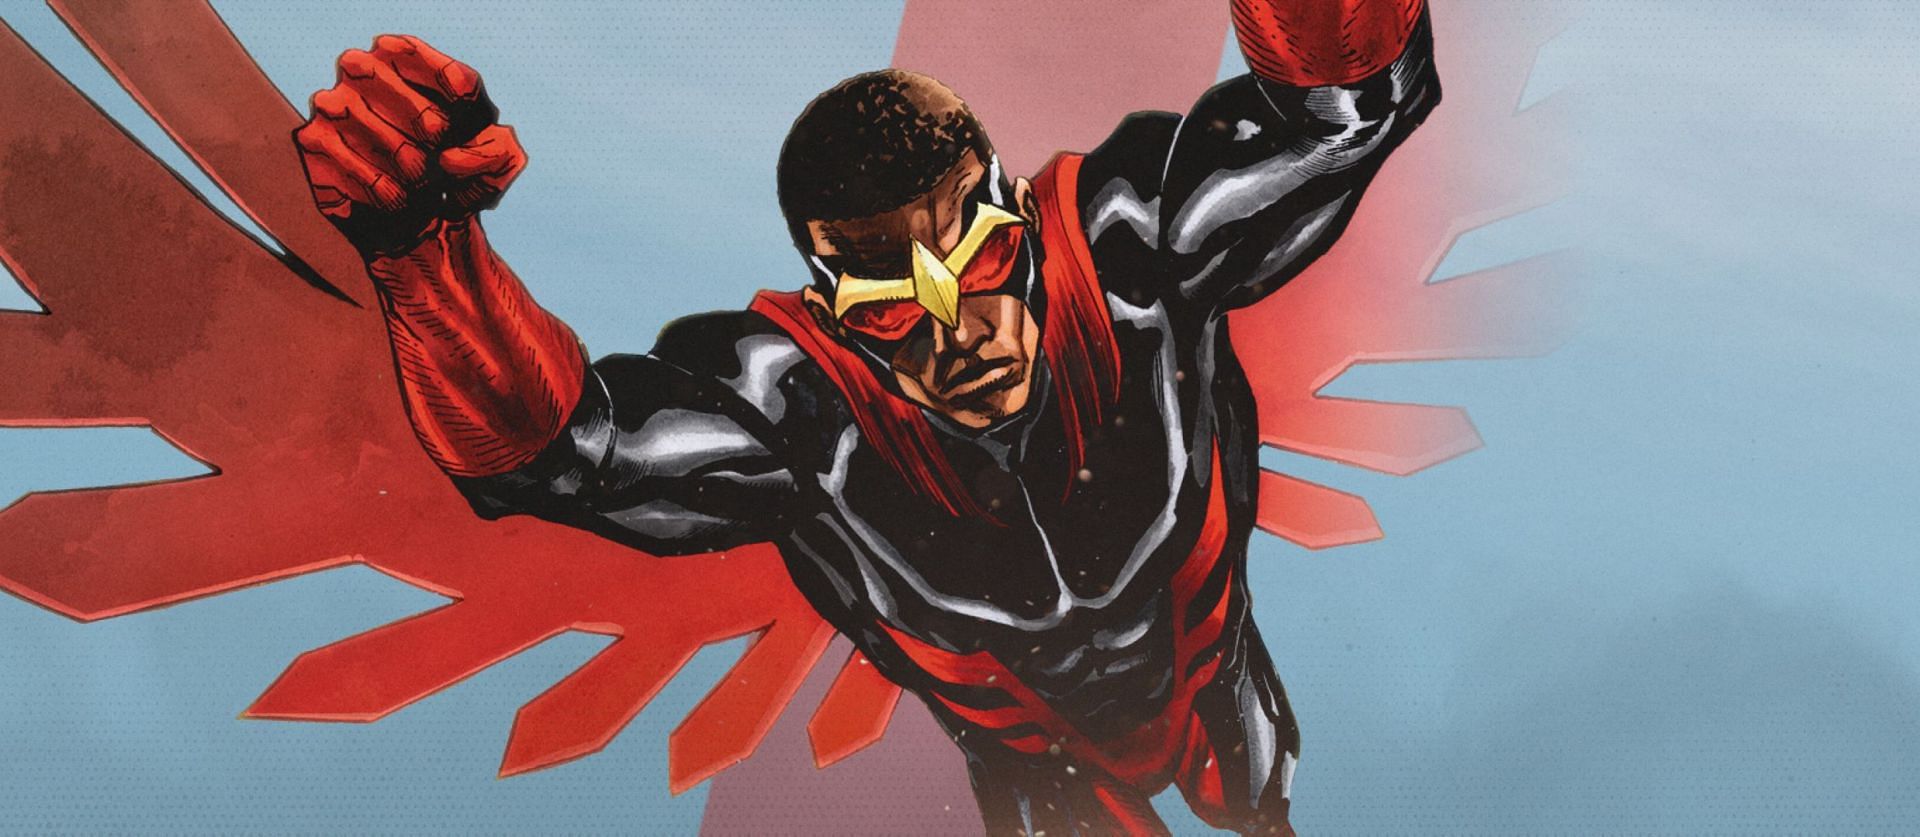 Falcon was first introduced in Captain America #17 (Image via Marvel)